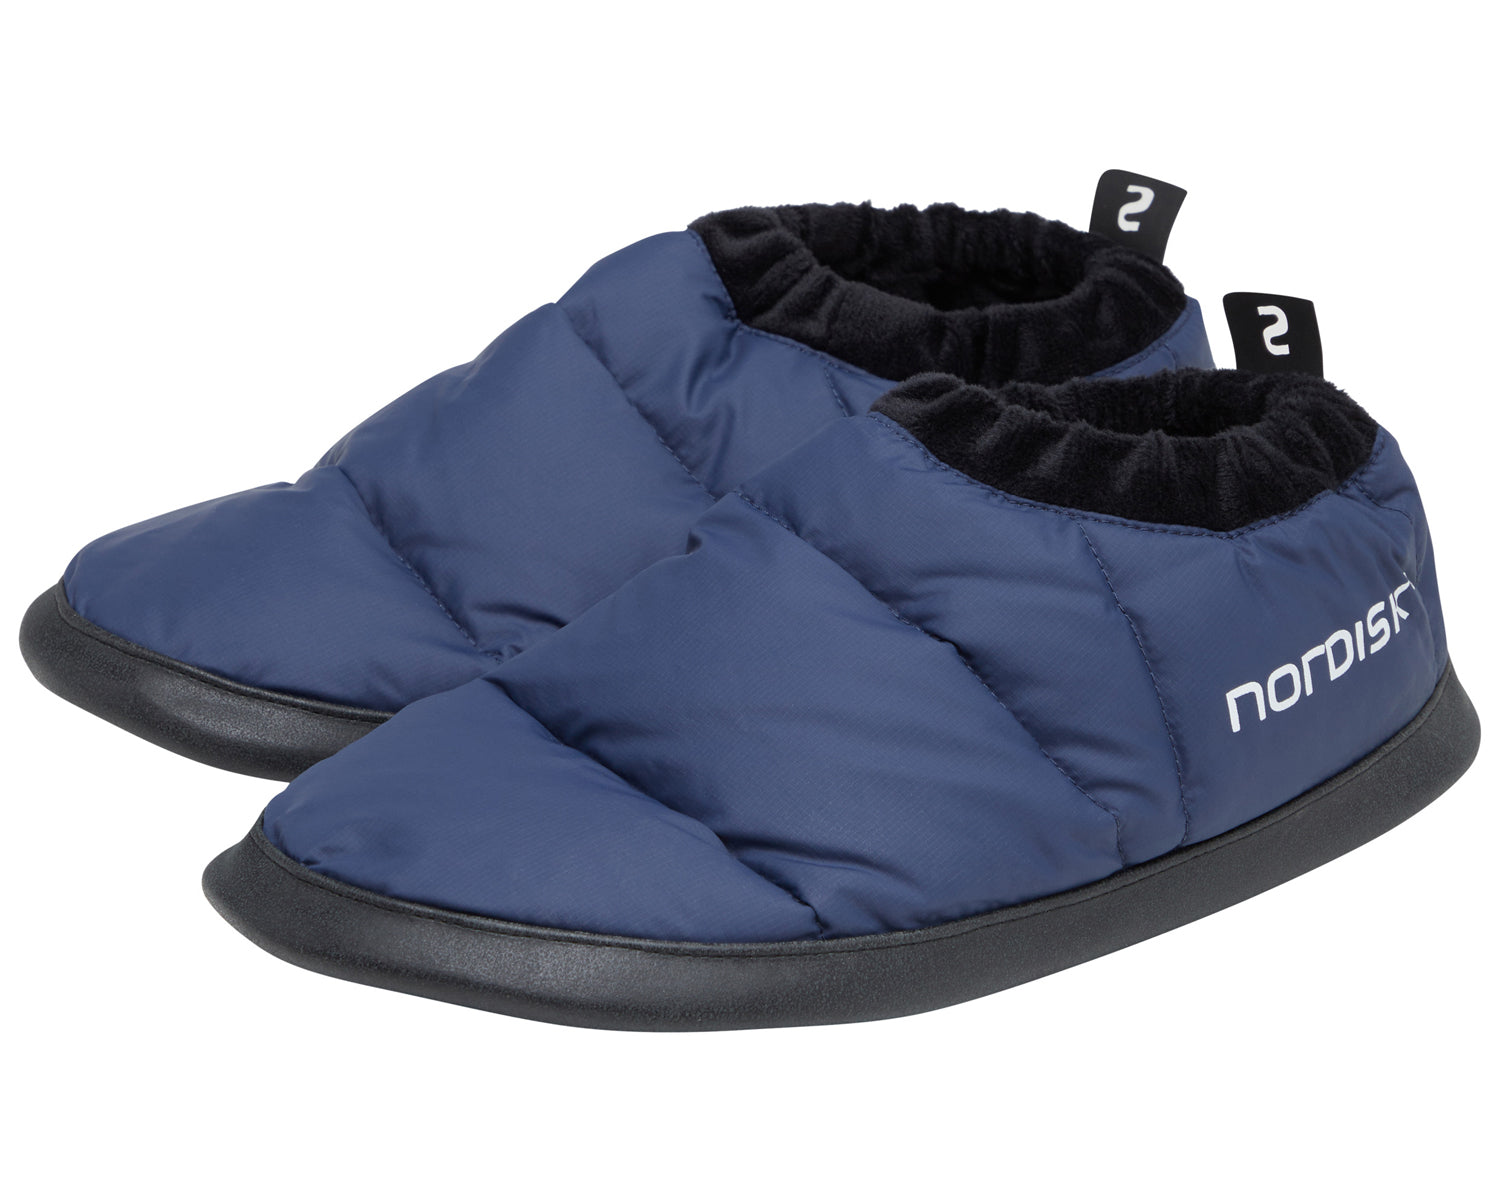 Mos down slippers - Dress Blue